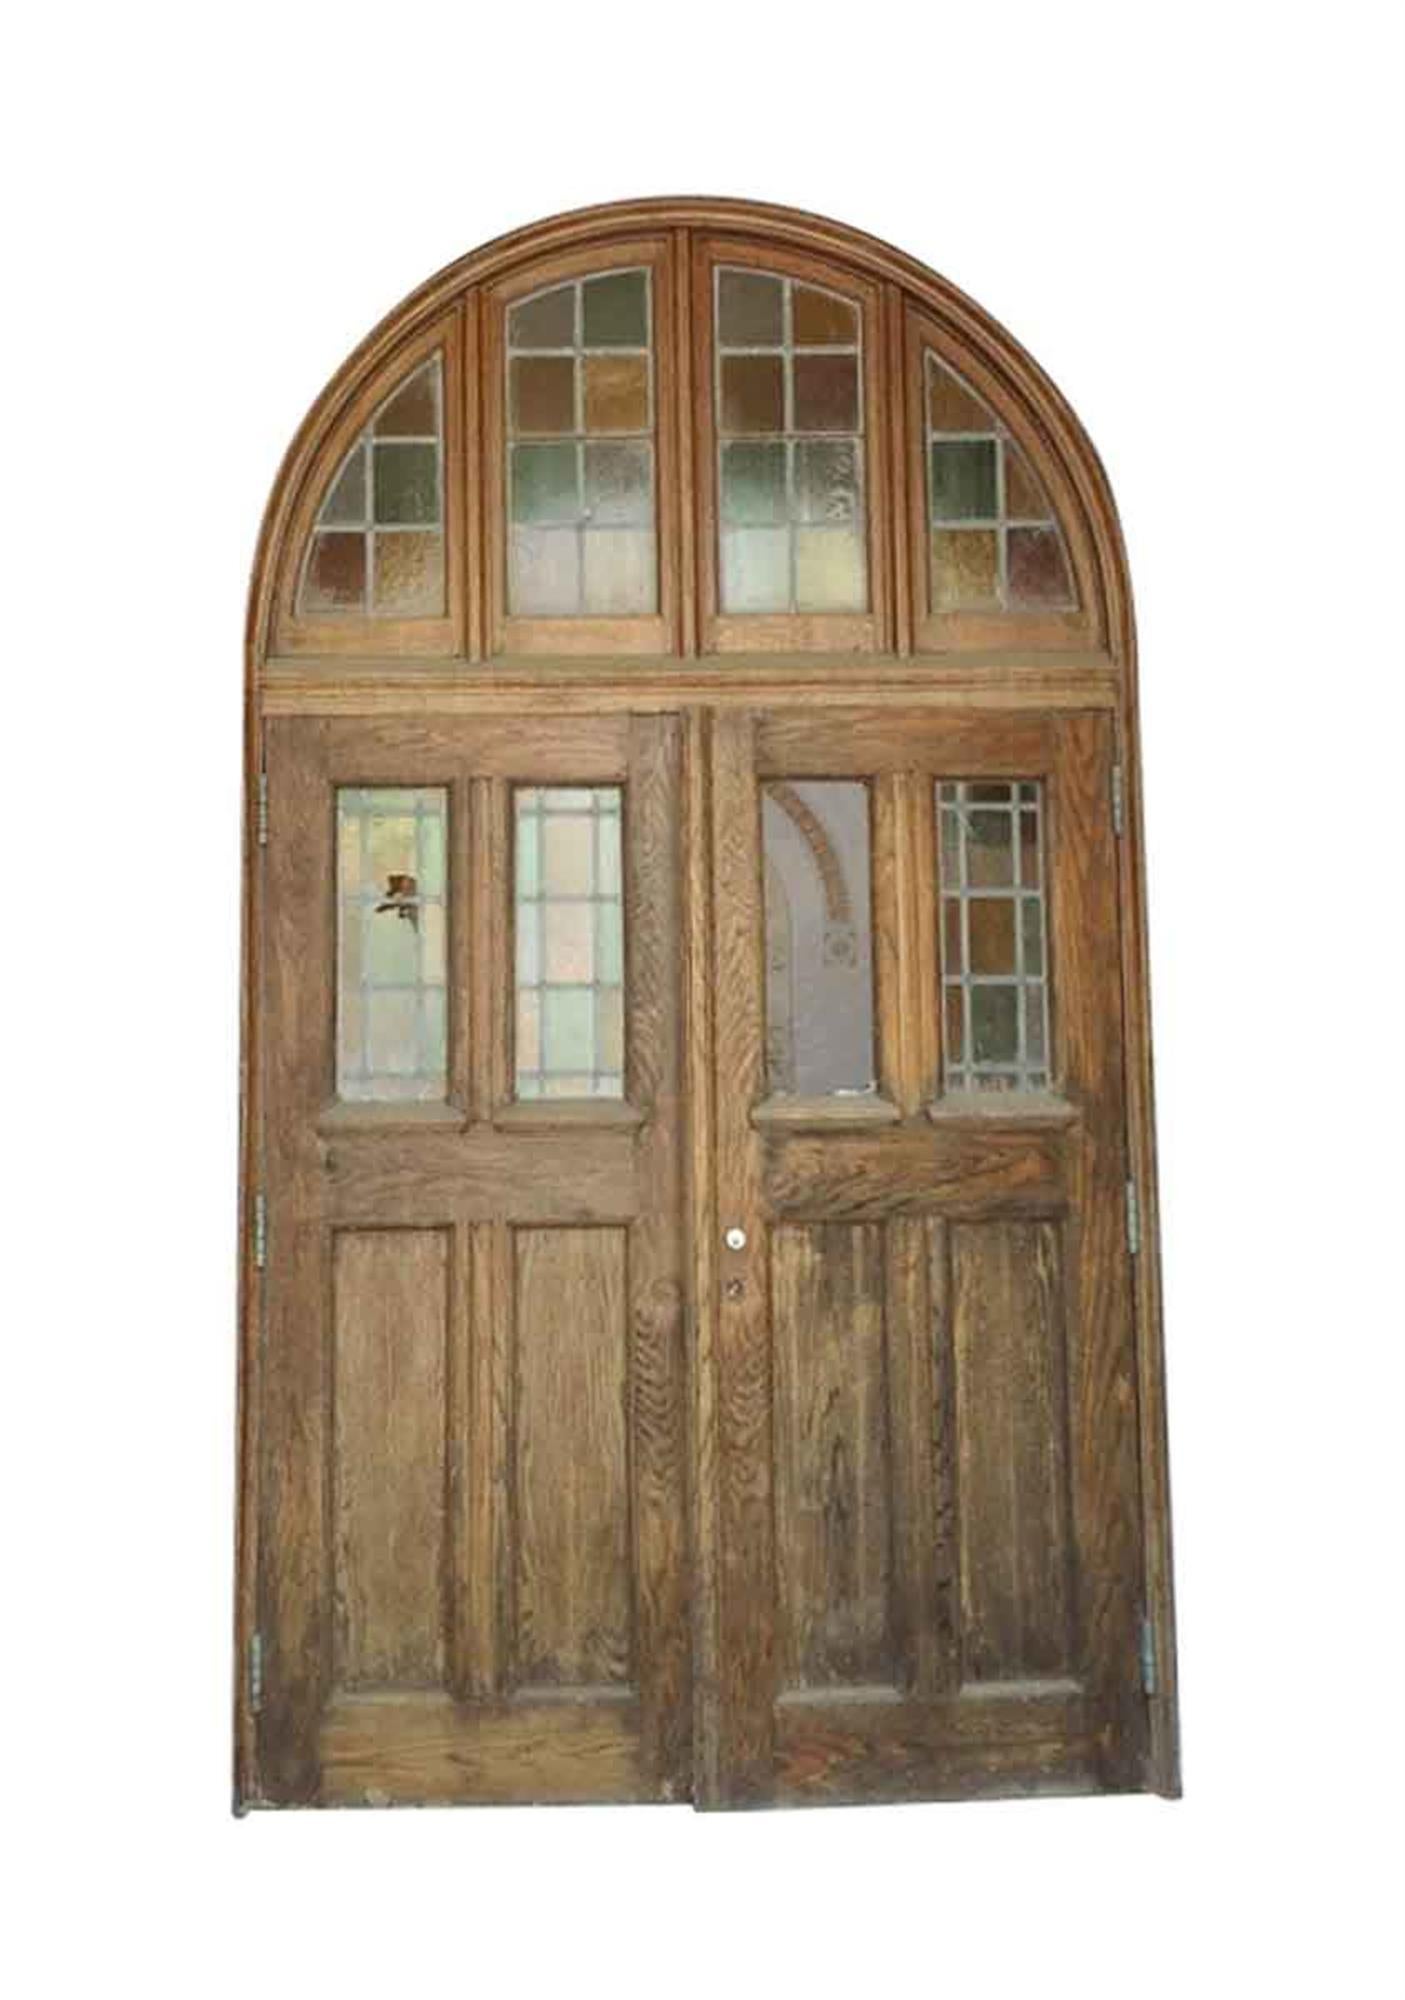 This is the entrance to the chapel from Rose Hill, the Tudor Mansion of American impresario Billy Rose. The doors and surround are oak with pastel stained glass that projects a subtle hue of light. Two panes of glass are broken. Price includes